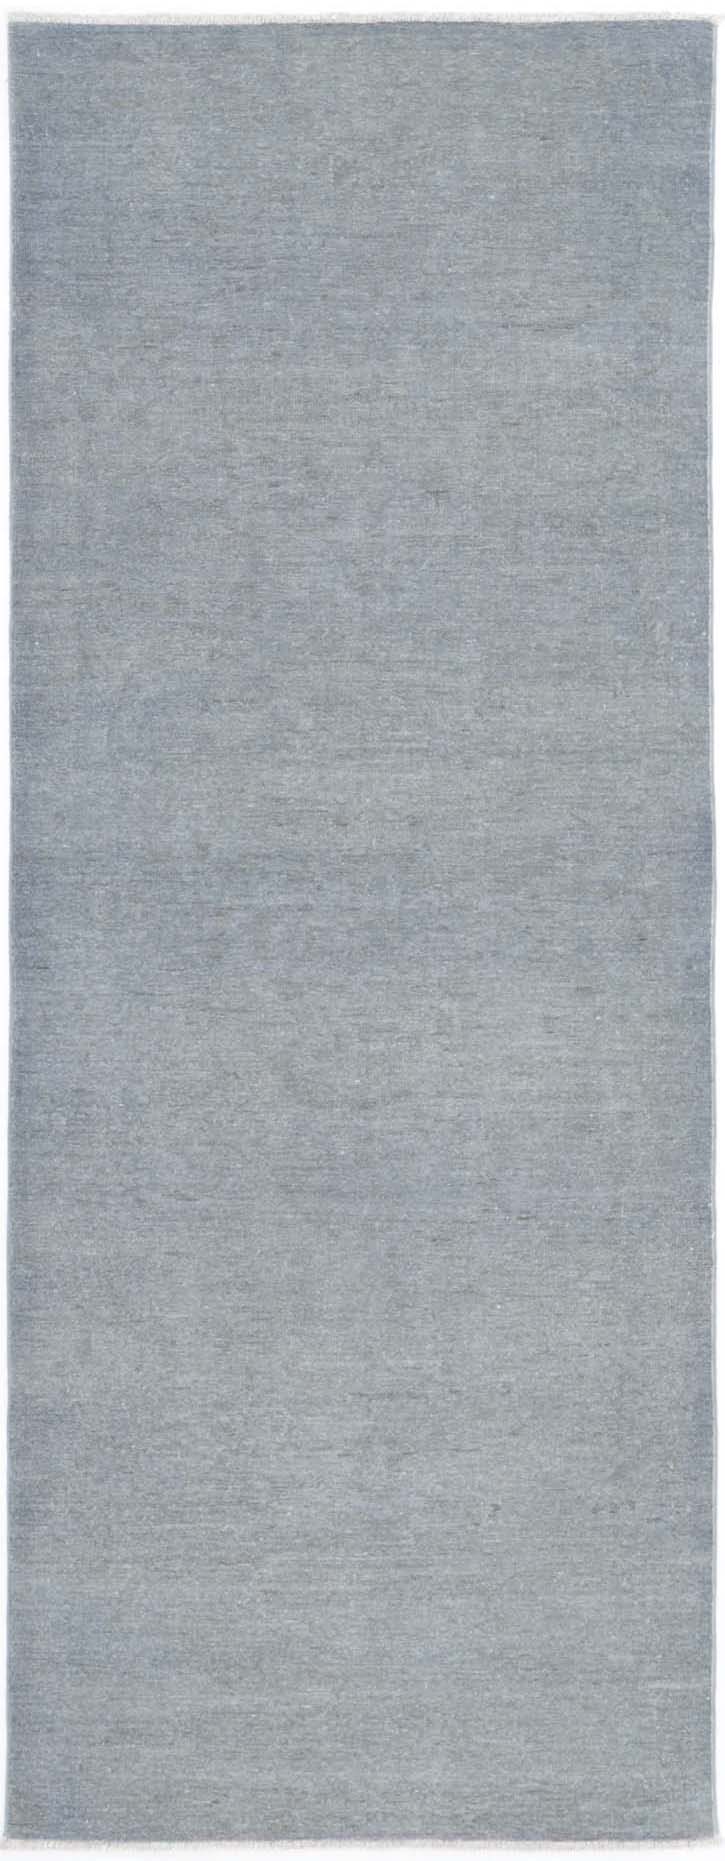 Hand Knotted Overdyed Wool Rug - 2'9'' x 7'10''